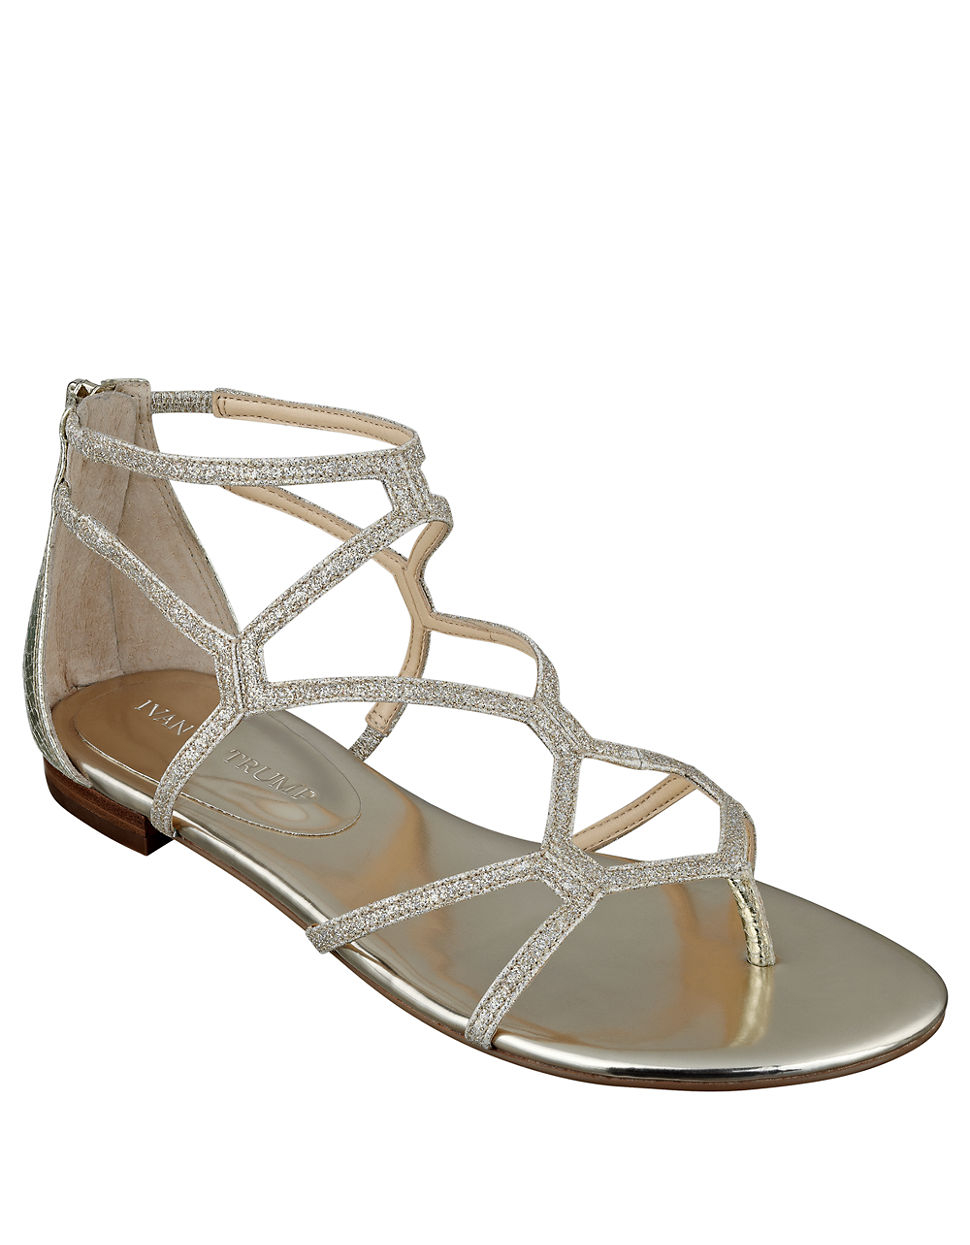 Ivanka trump Beauty Caged Sandals in Gold (Yellow Gold)